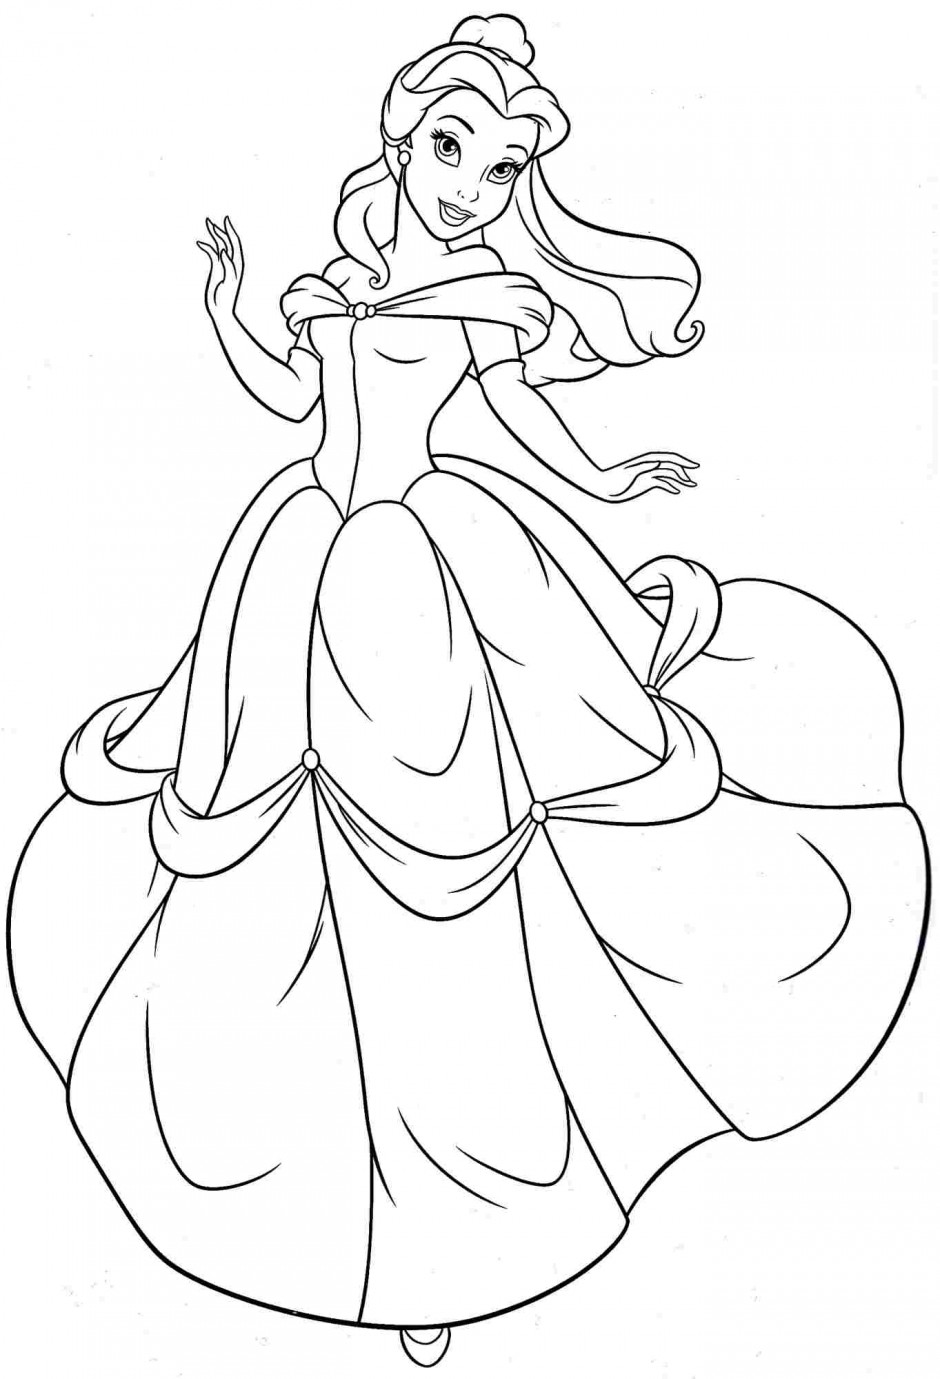 disney-princess-belle-coloring-page-crayola-com-free-printable-belle-coloring-pages-for-kids